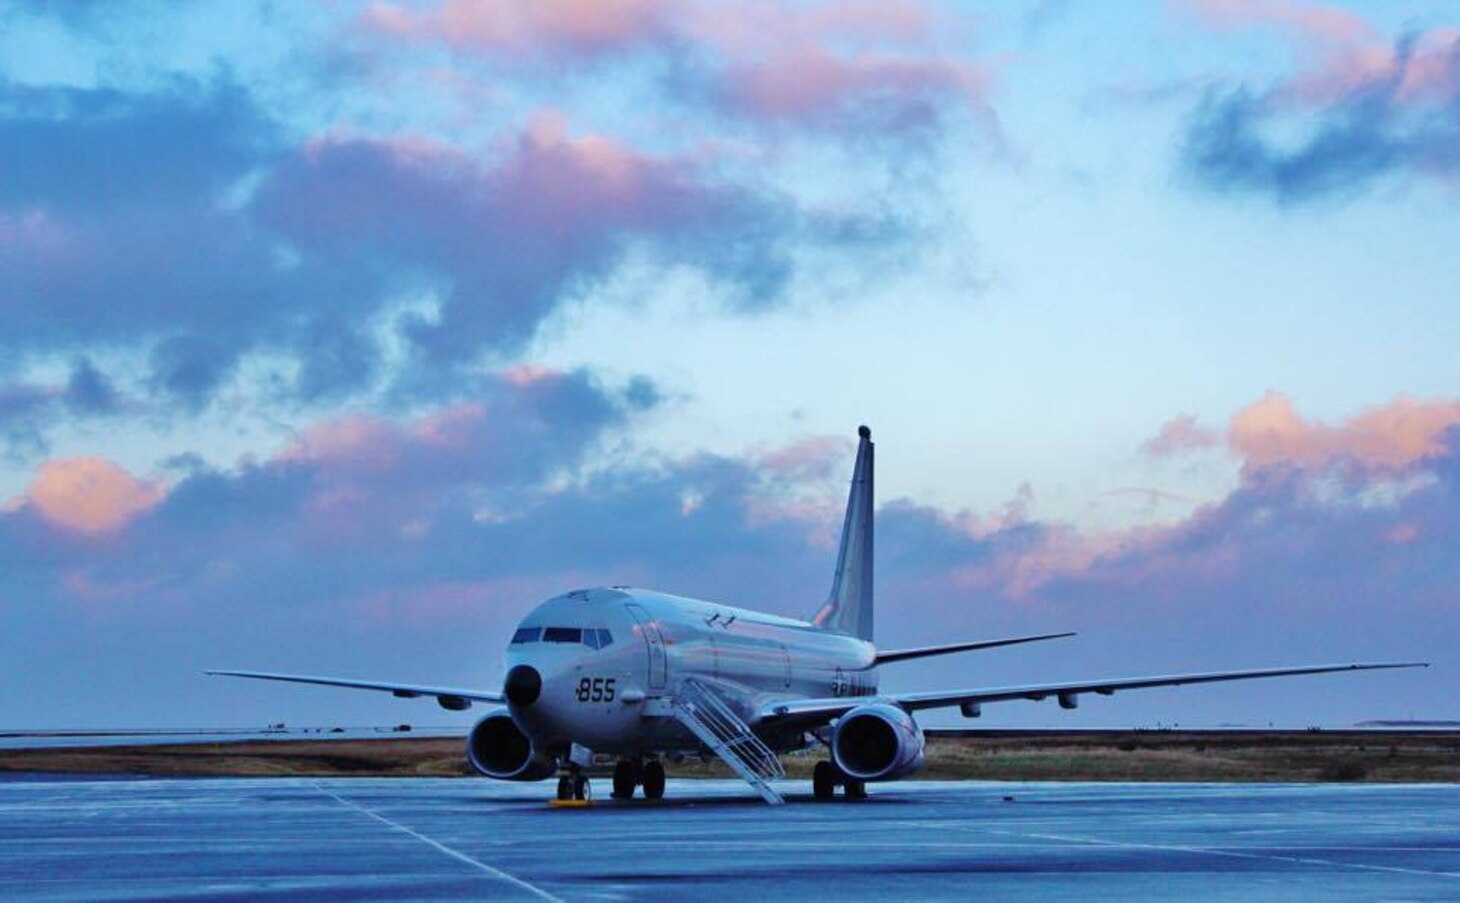 FILE PHOTO (Oct. 26, 2016) A P-8A Poseidon aircraft assigned to Patrol Squadron (VP) 45 is parked on the flight line of Naval Air Station Keflavik. U.S. 6th Fleet, headquartered in Naples, Italy, conducts the full spectrum of joint and naval operations, often in concert with allied, joint, and interagency partners, in order to advance U.S. national interests and security and stability in Europe and Africa.